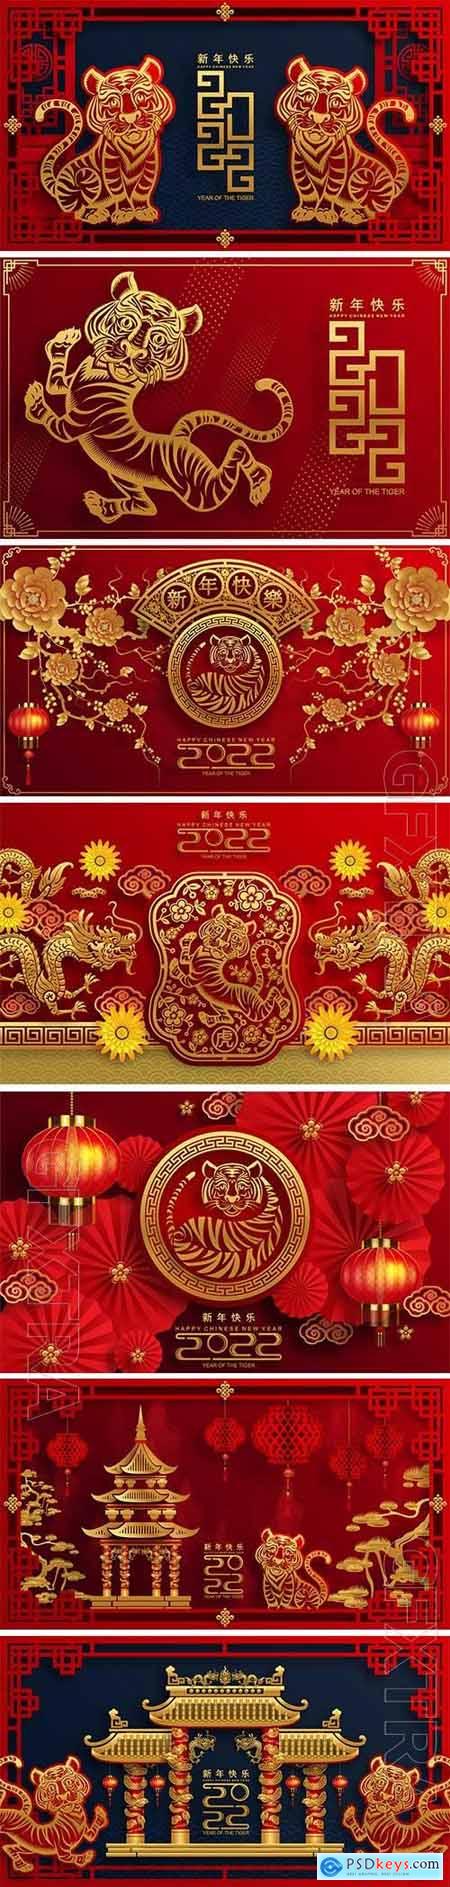 Chinese New Year, illustration with tiger, symbol of 2022, vector texts